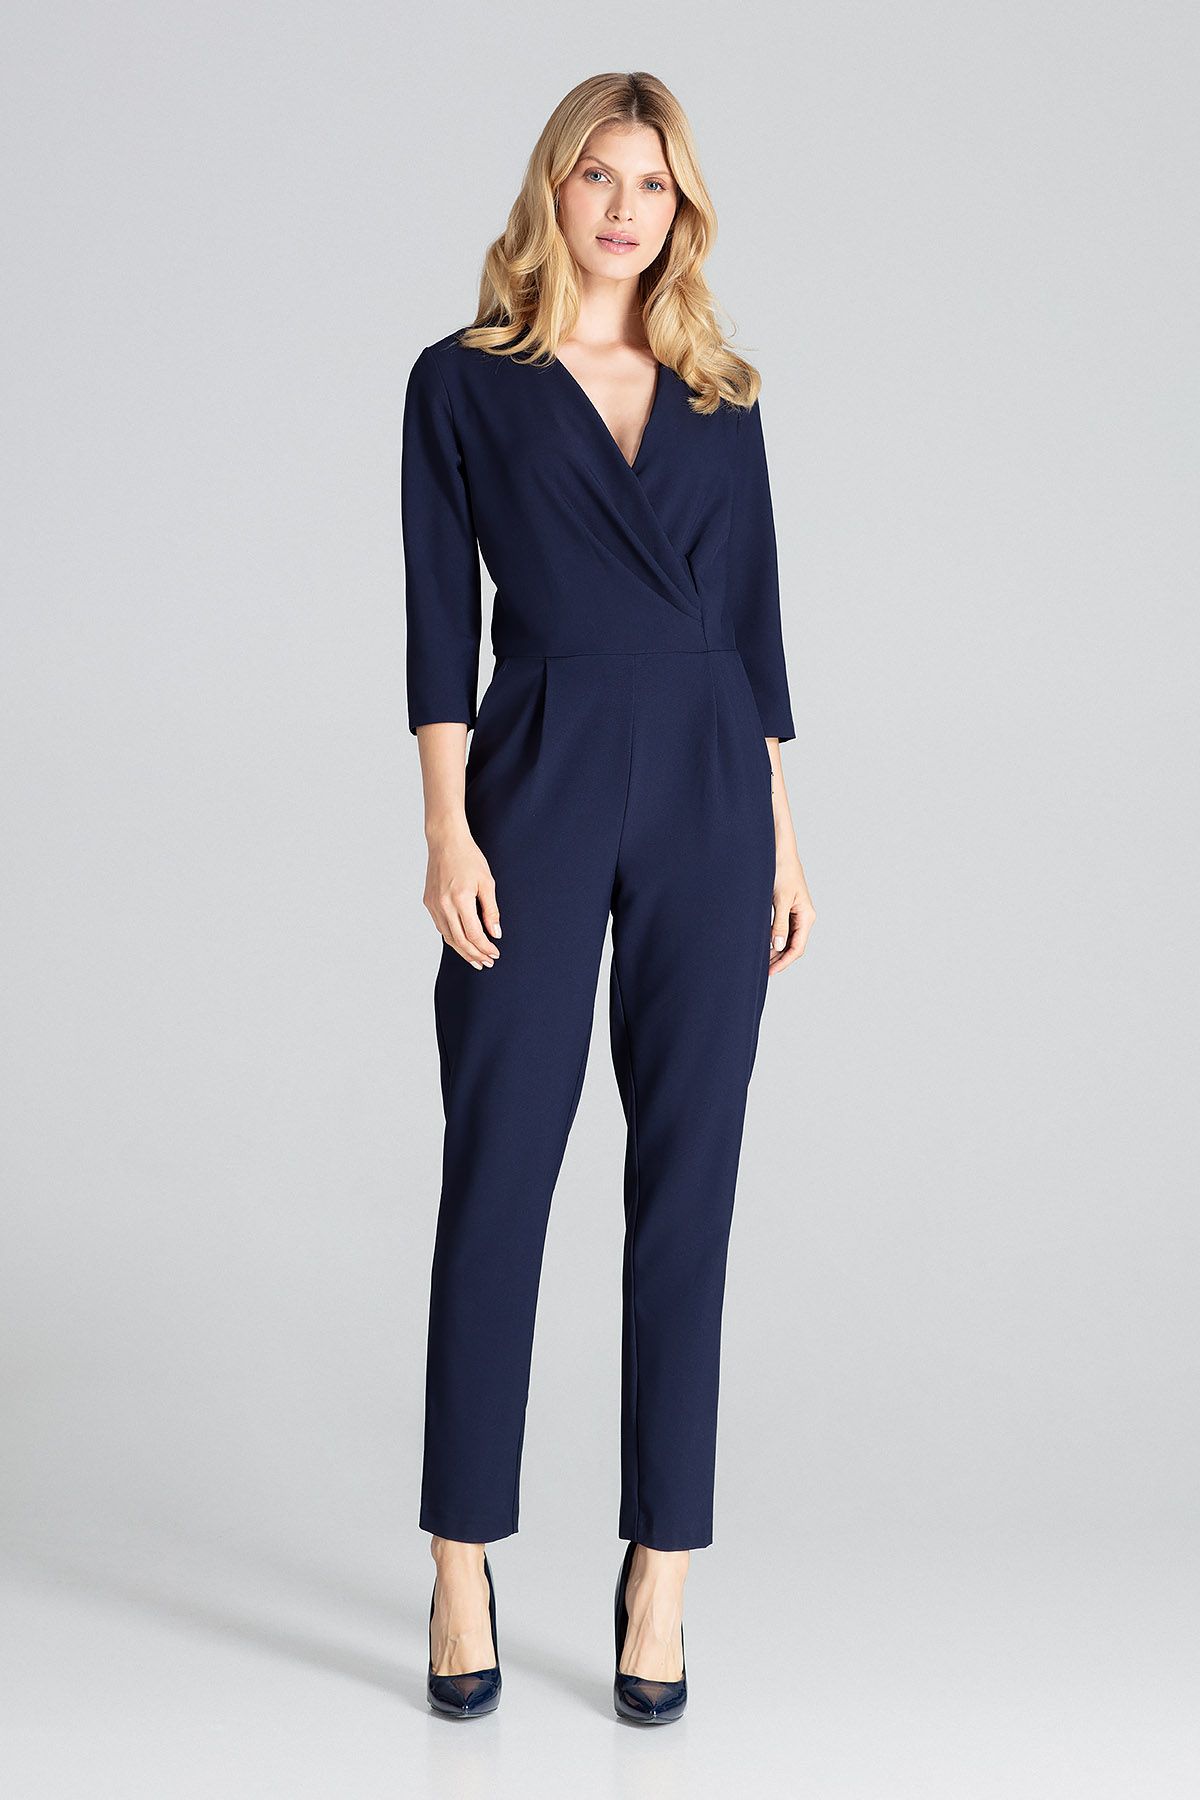 Navy Jumpsuit with 3/4 Sleeves